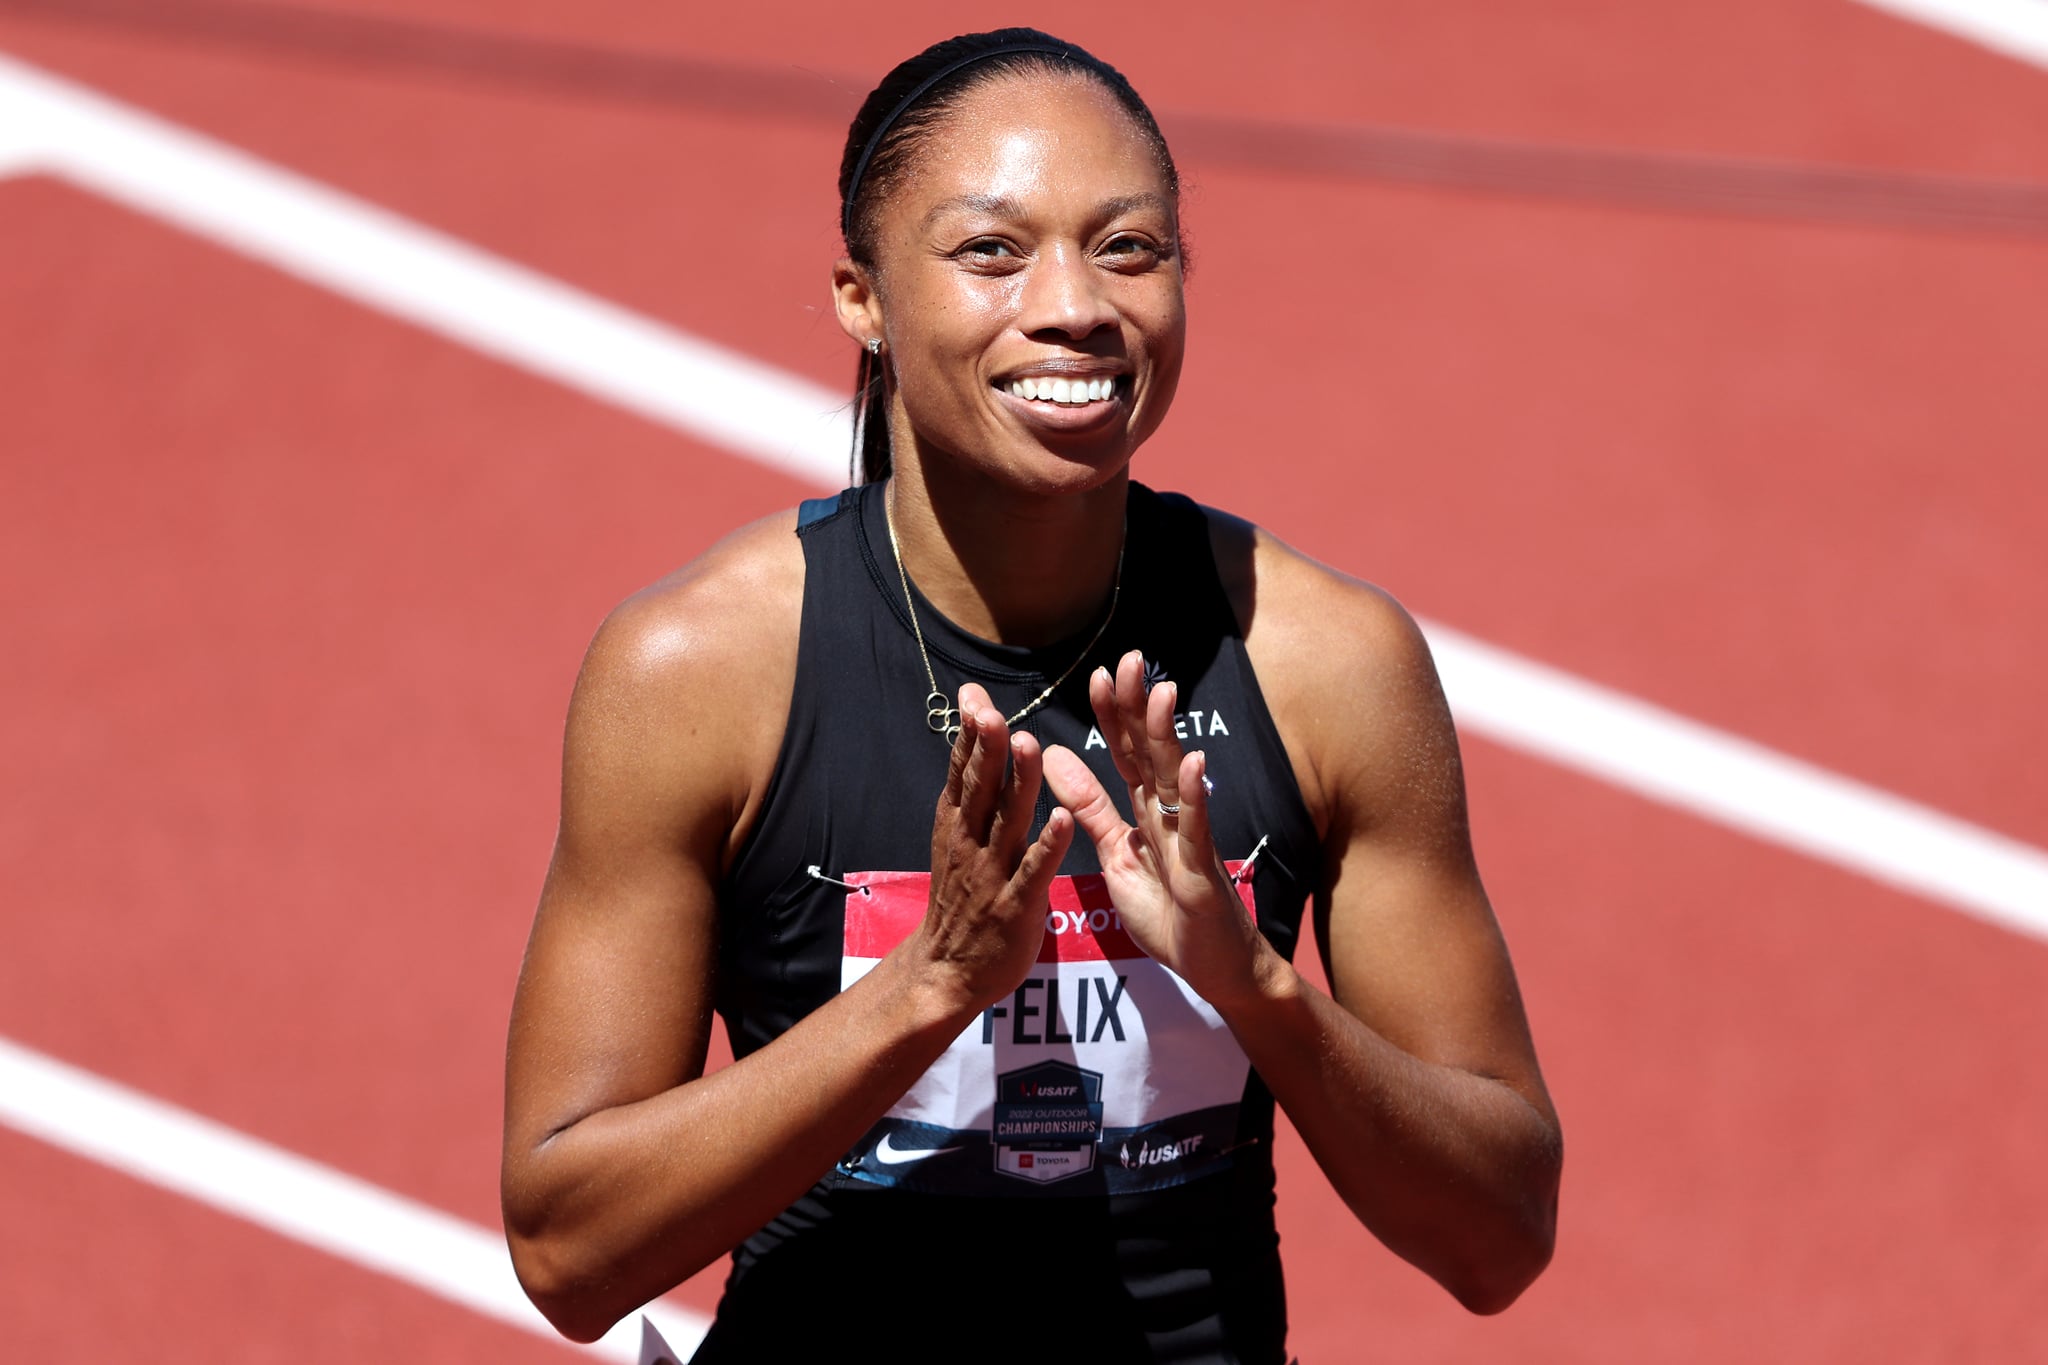 EUGENE, OREGON - JUNE 24: Allyson Felix acknowledges the crowd after competing in the women's 400 meter dash final during the USATF Championships at Hayward Field on June 24, 2022 in Eugene, Oregon. (Photo by Sean M. Haffey/Getty Images)